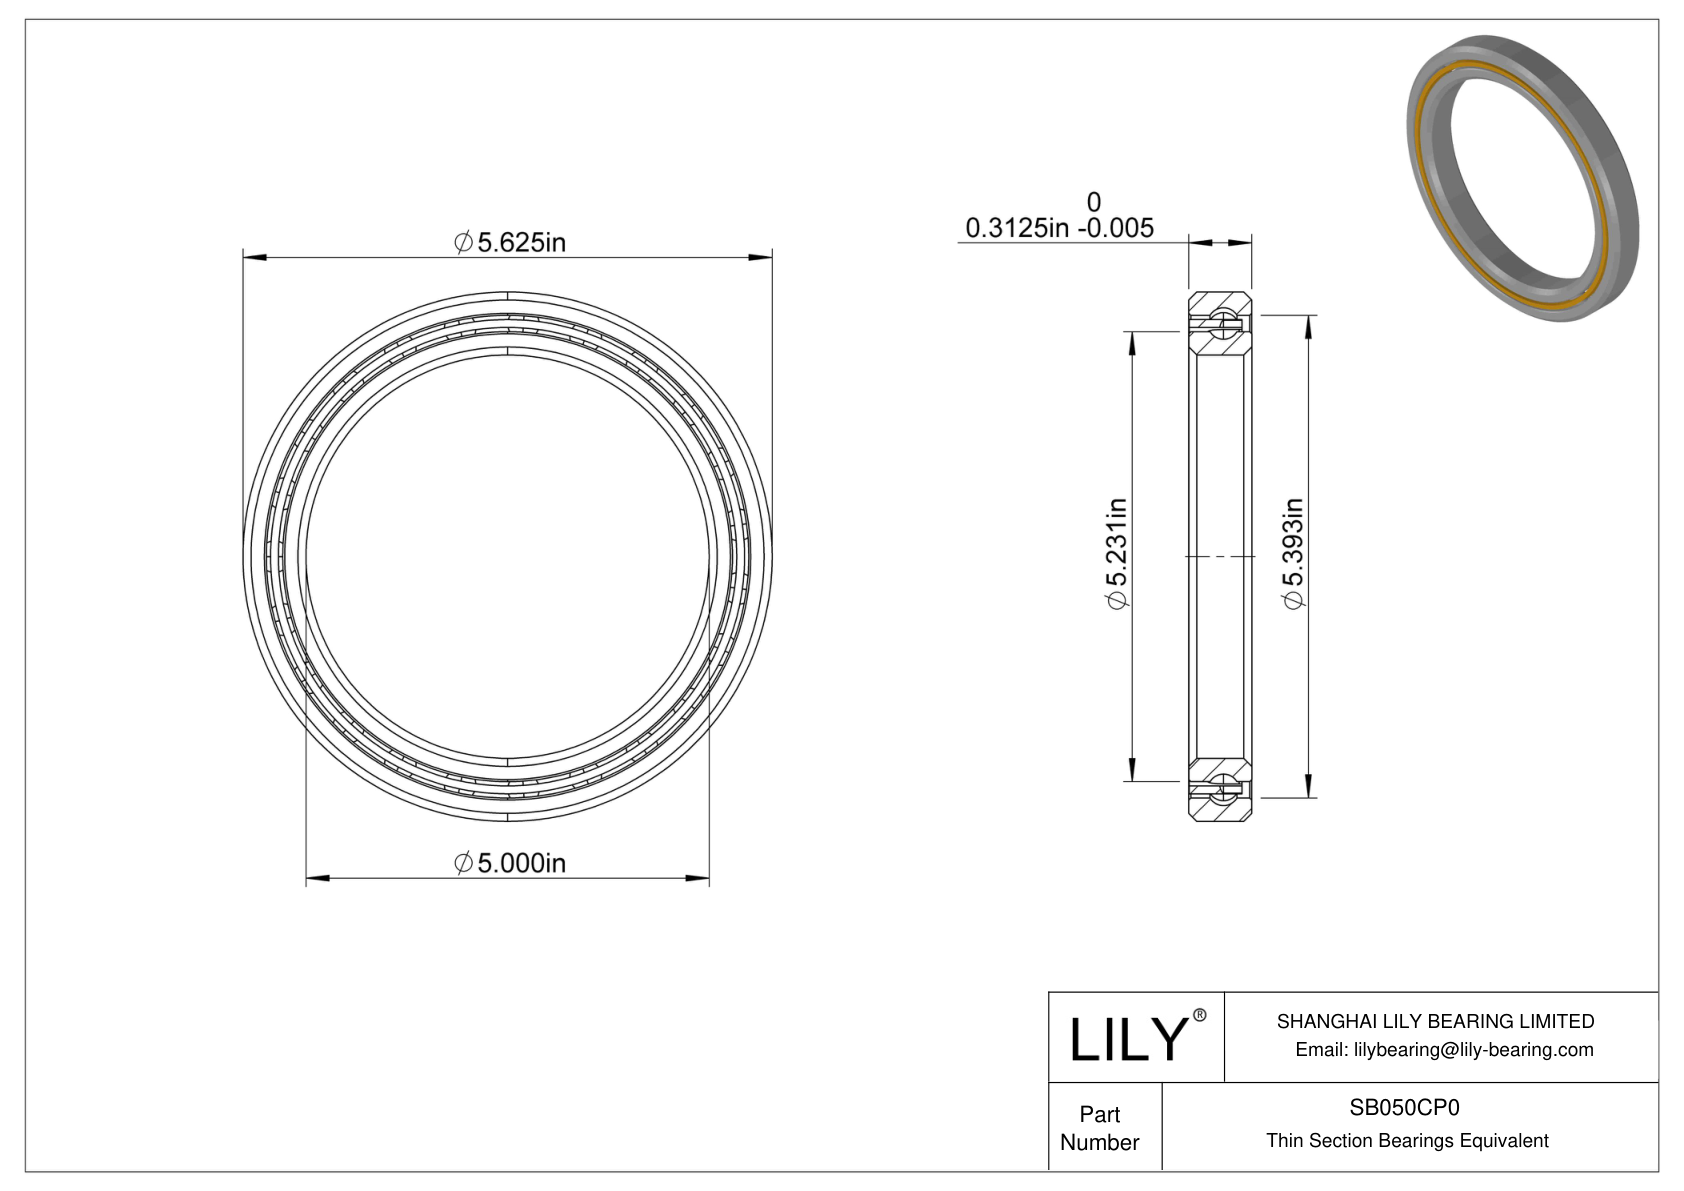 SB050CP0 Constant Section (CS) Bearings cad drawing